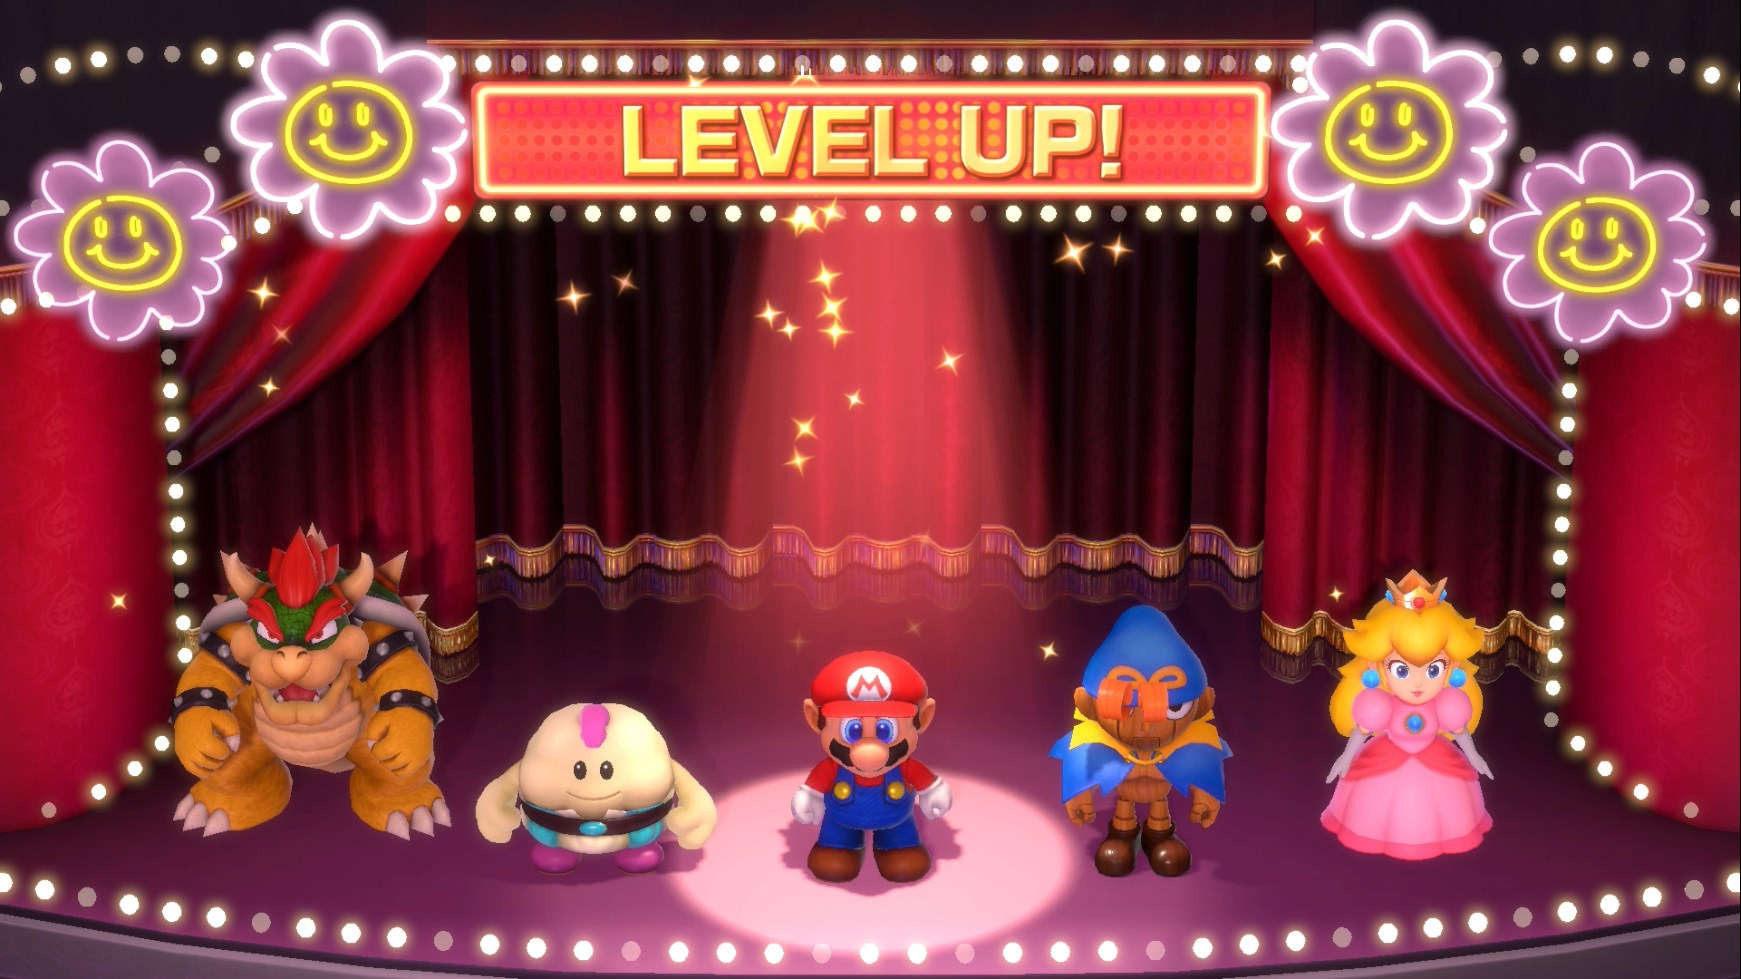 The level up screen in Super Mario RPG, which shows the whole cast on a stage with a spotlight